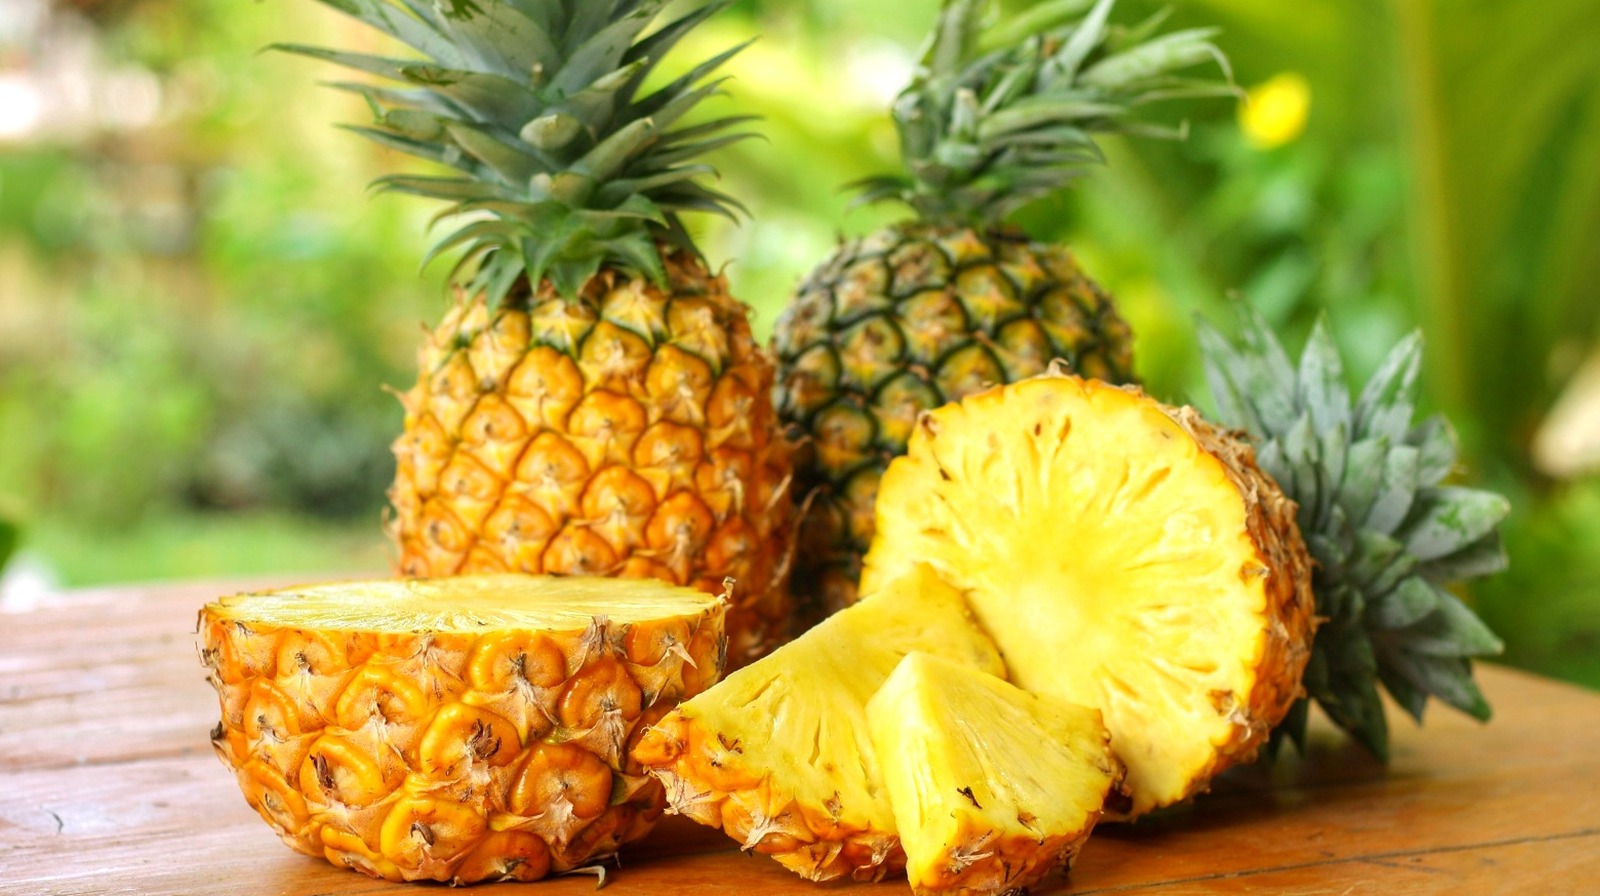 How Salt Can Strangely Help Your Pineapple